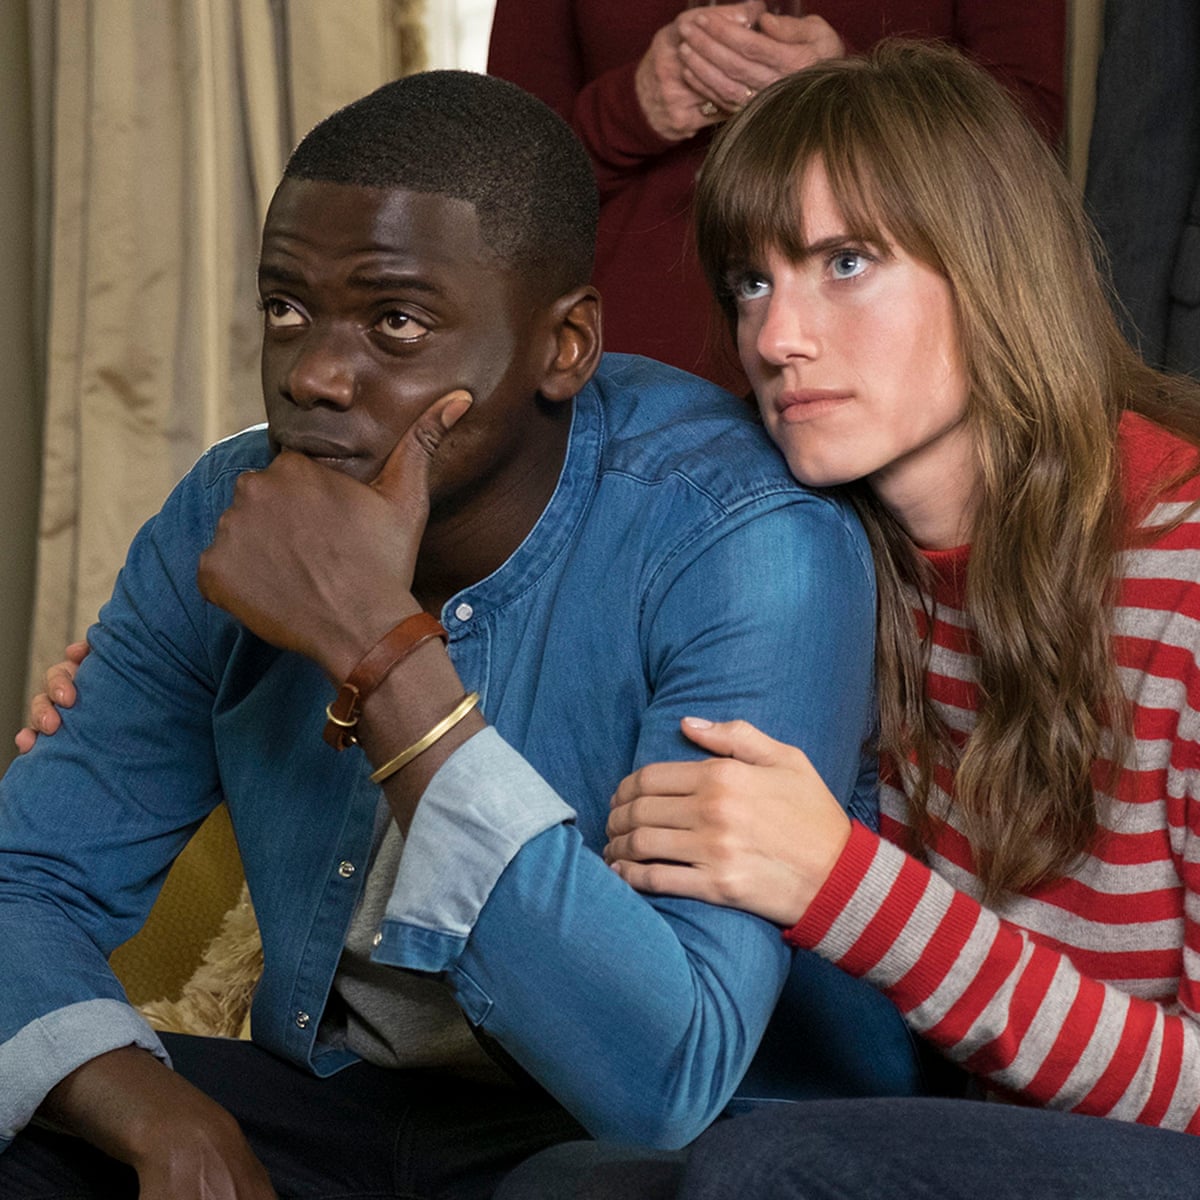 Why Get Out should win the 2018 best picture Oscar | Get Out | The Guardian